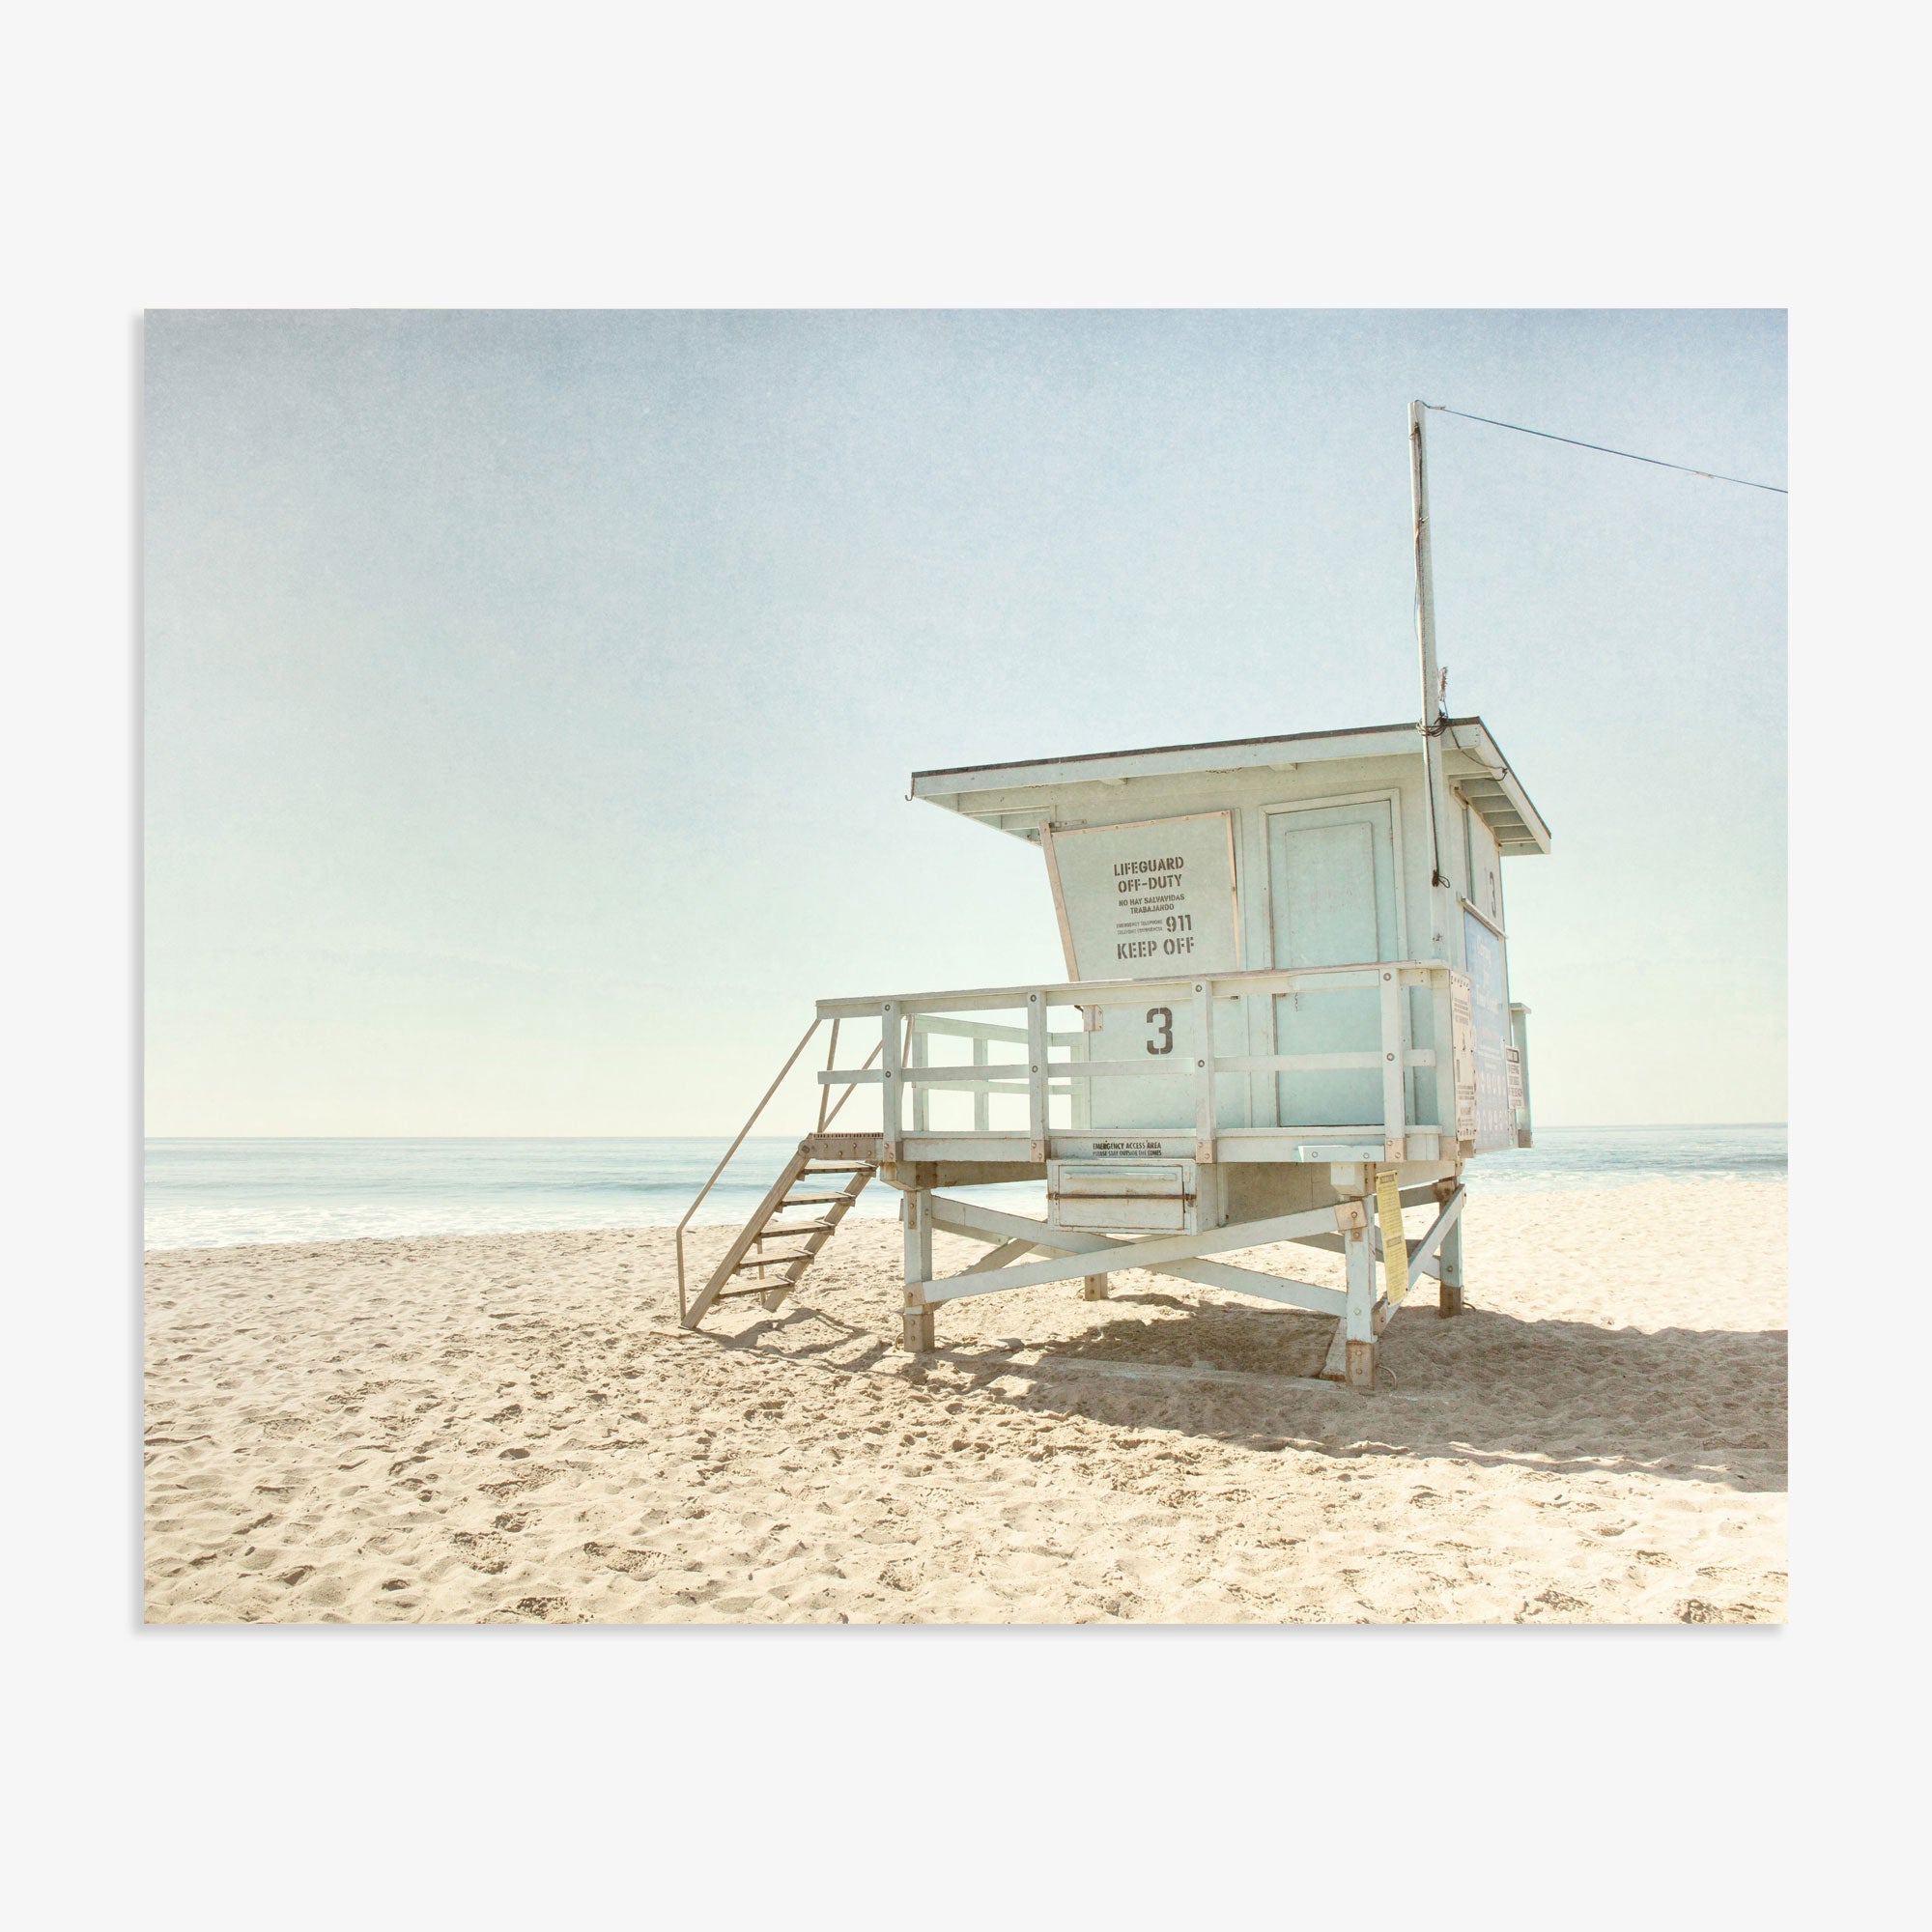 White Offley Green lifeguard tower on a sandy Malibu beach under a clear sky, with no people visible. The tower features steps leading up to an enclosed area.